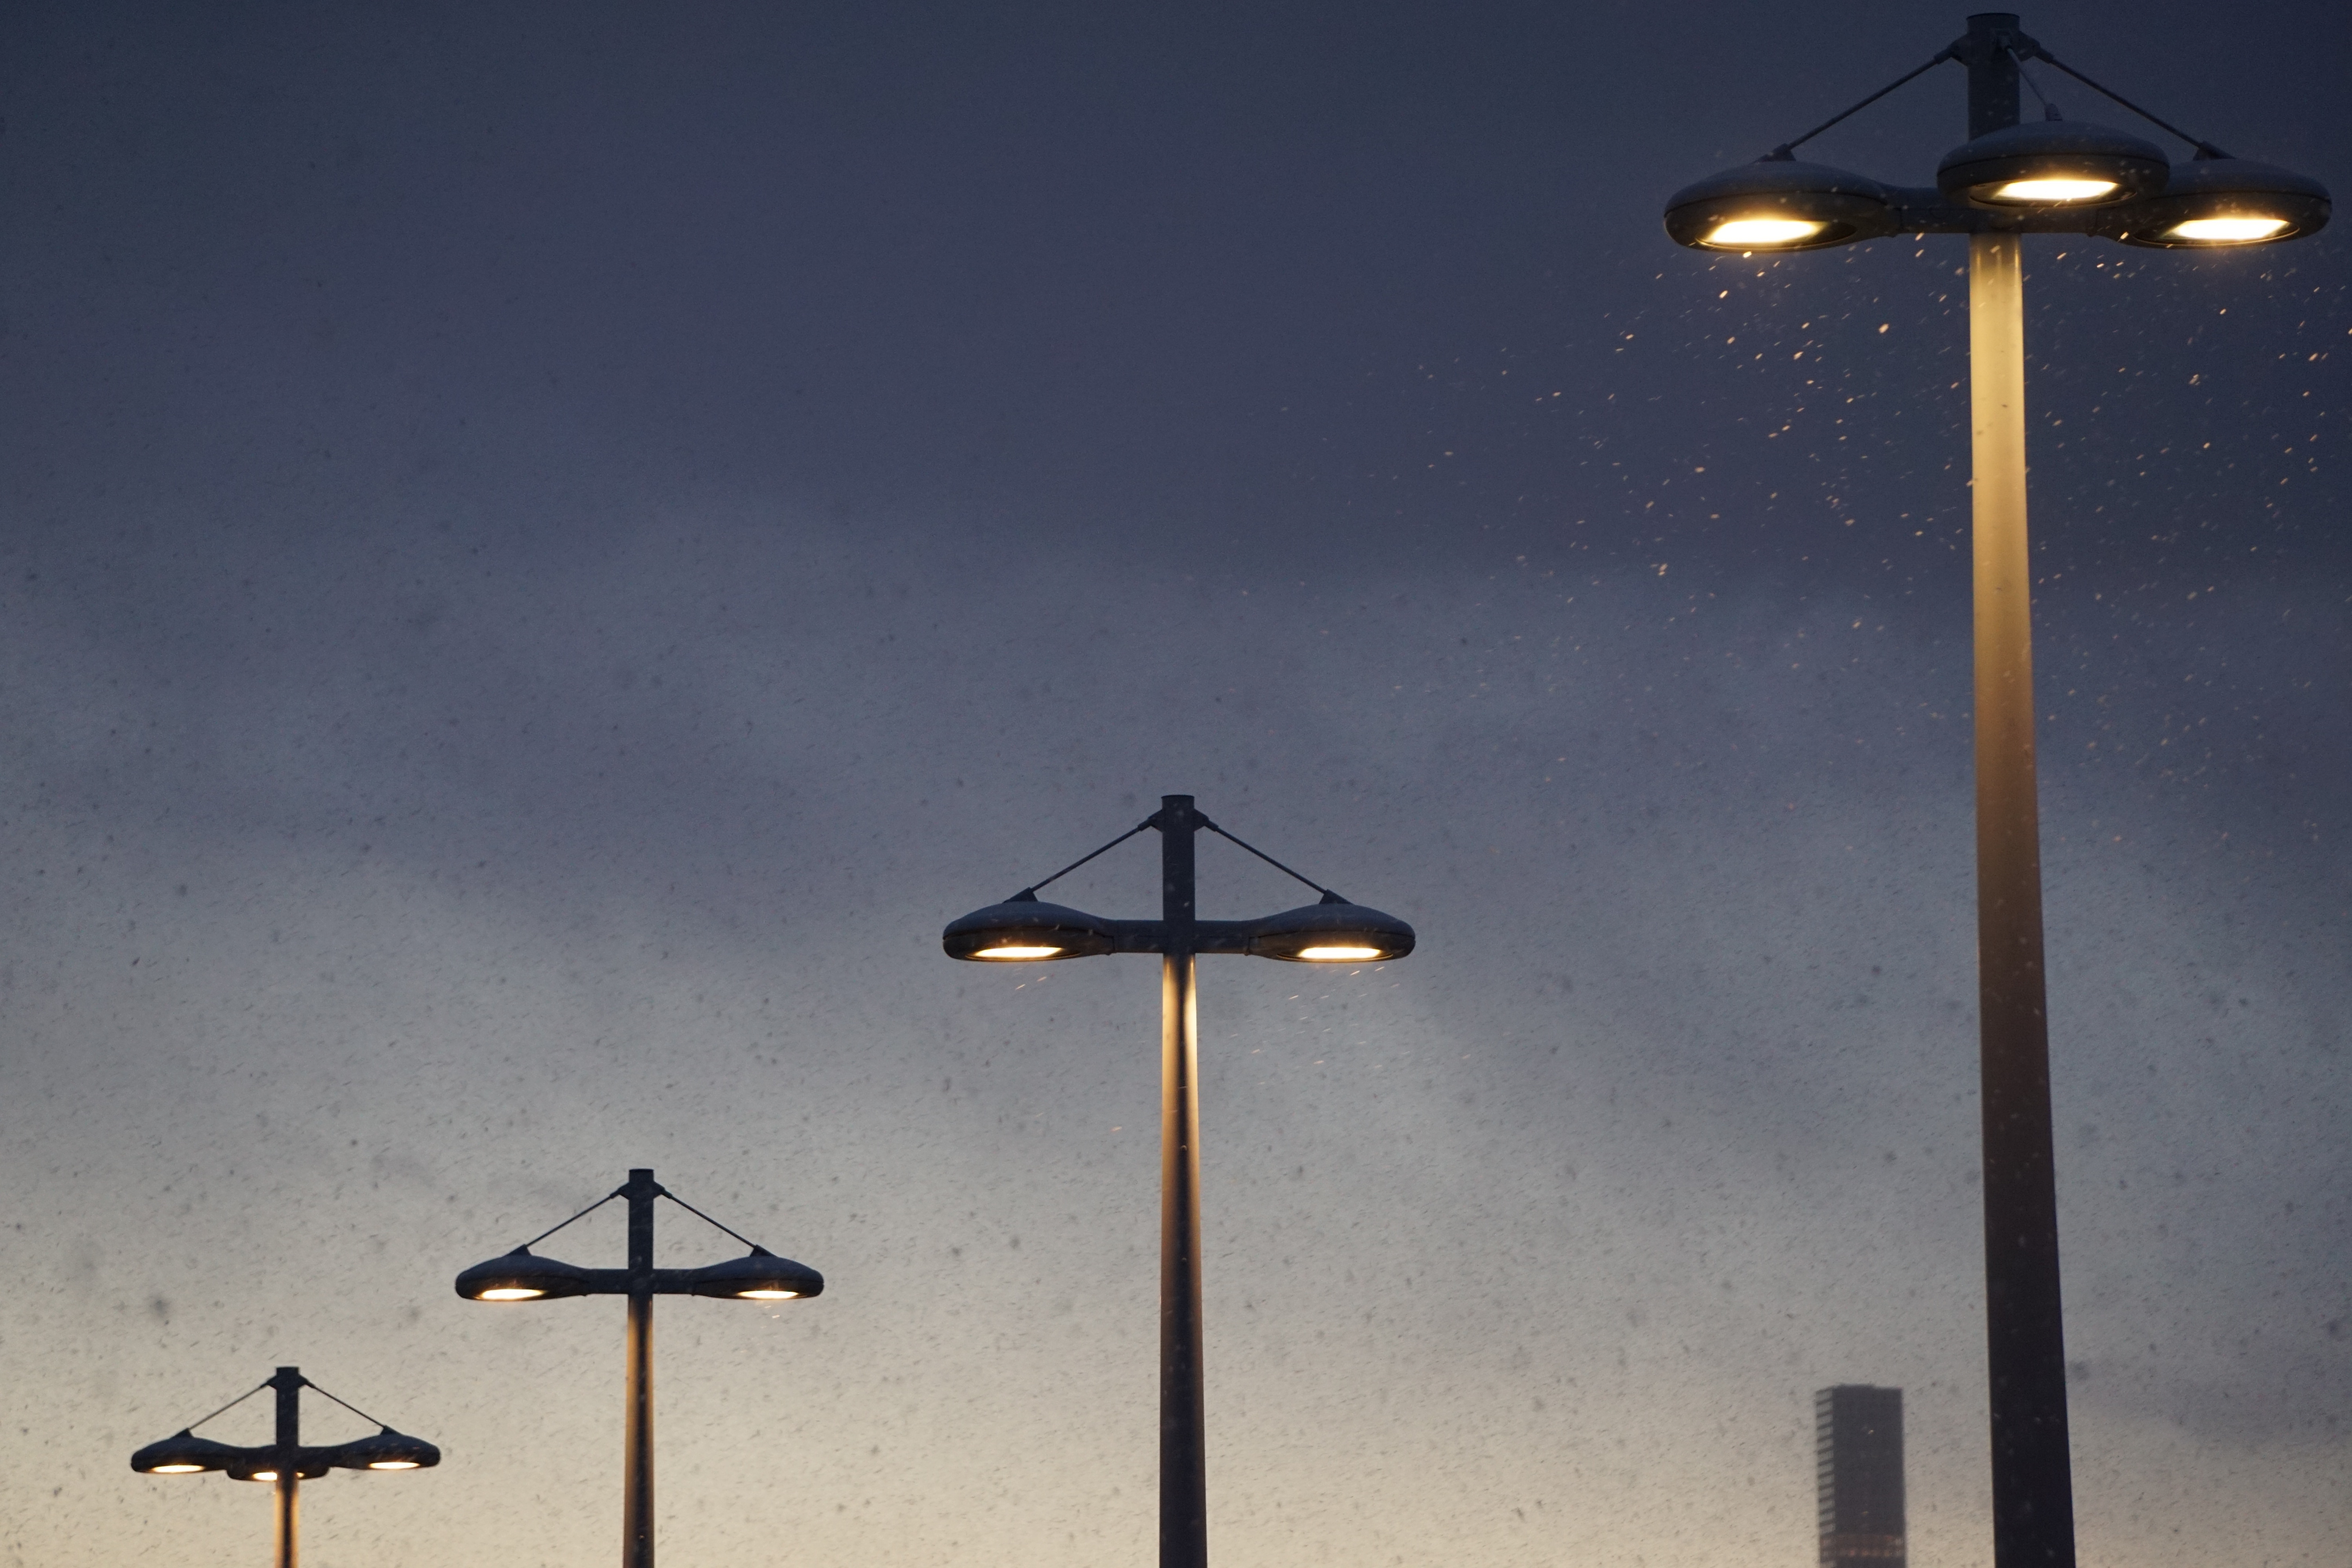 four lighted lampposts during night time